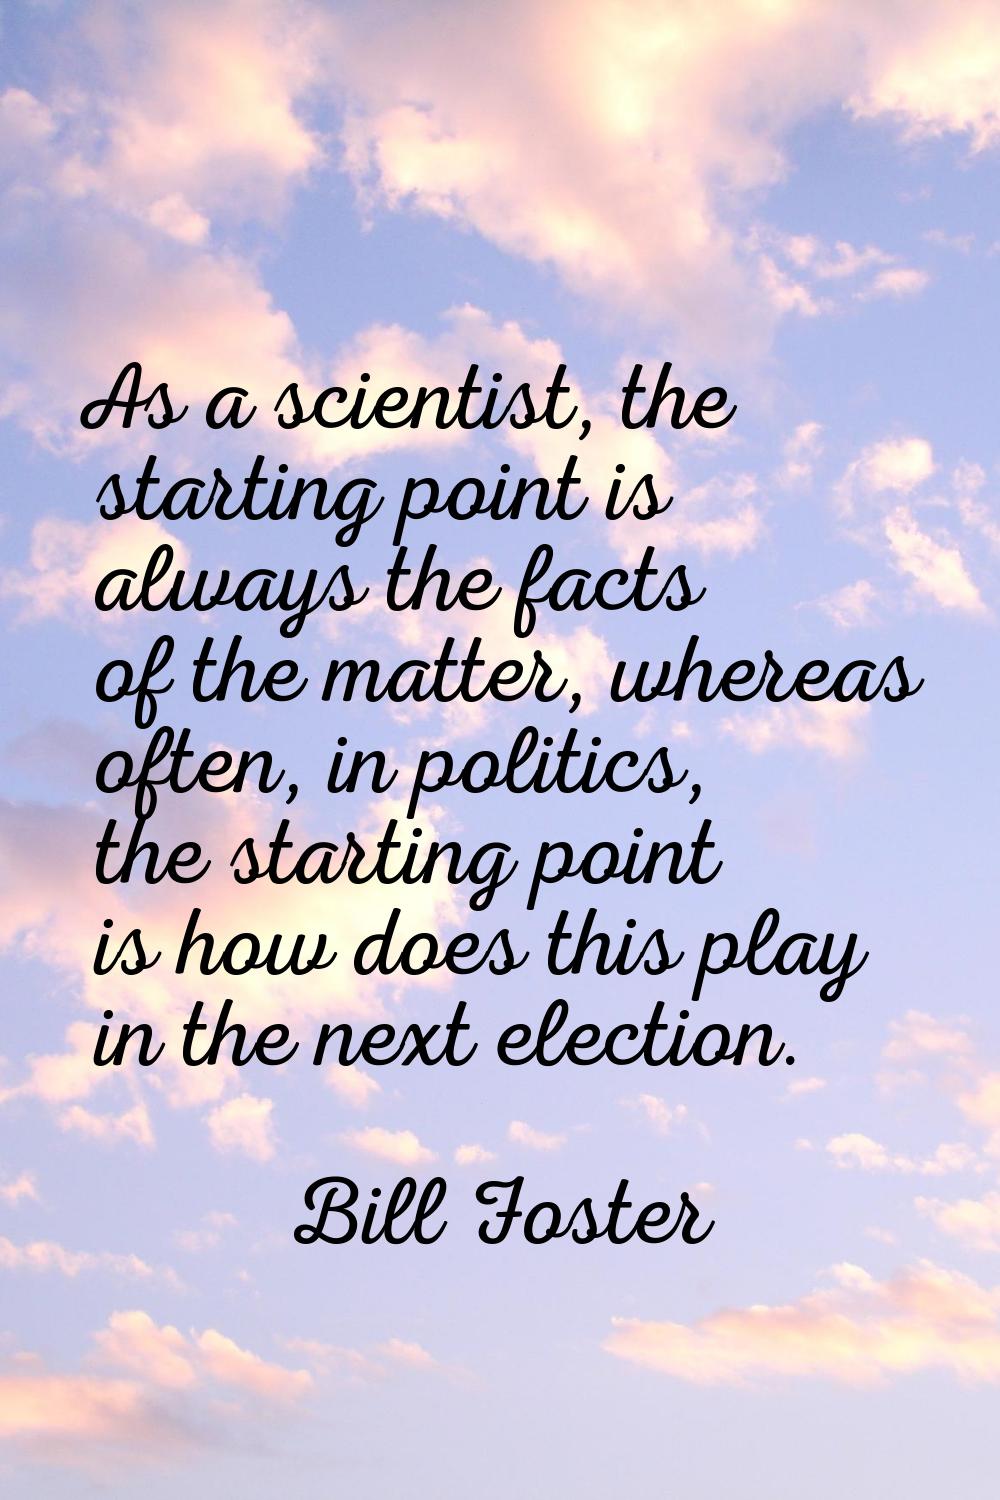 As a scientist, the starting point is always the facts of the matter, whereas often, in politics, t